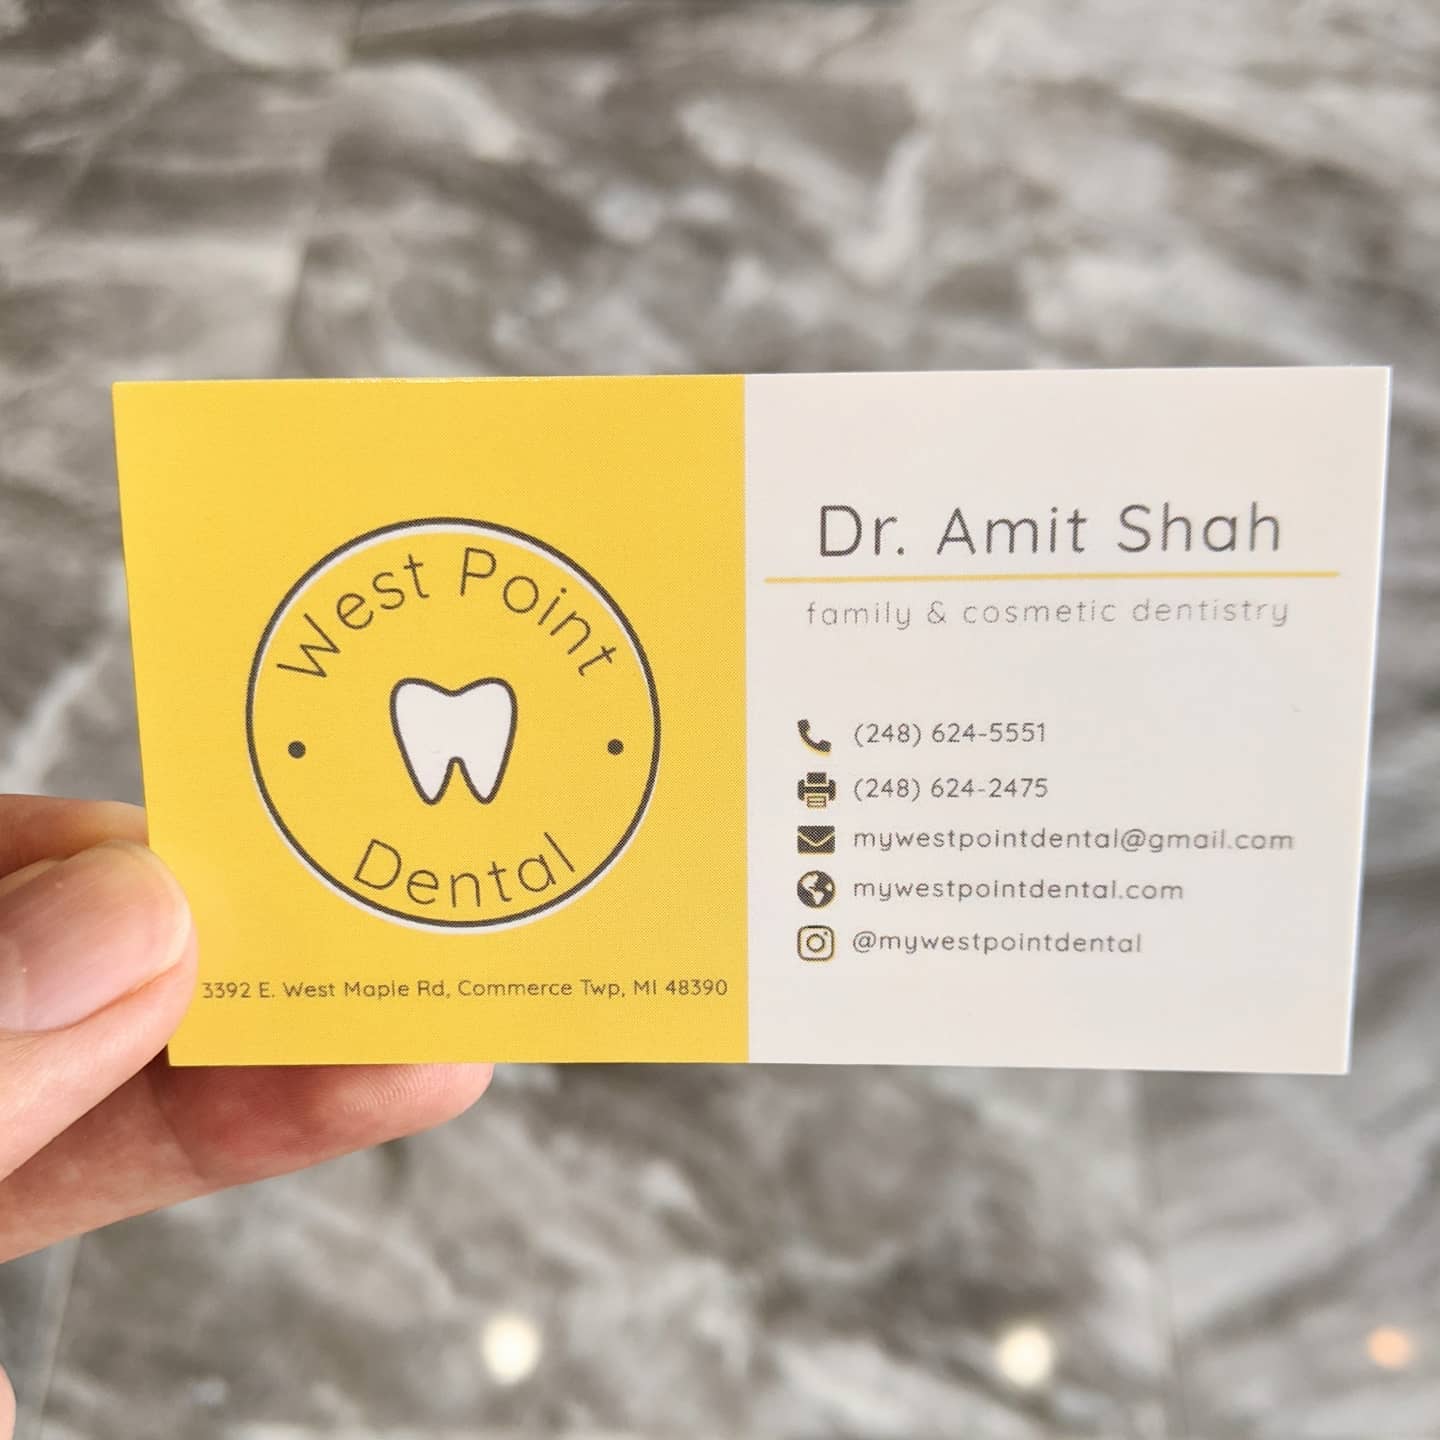 The West Point Dental business card